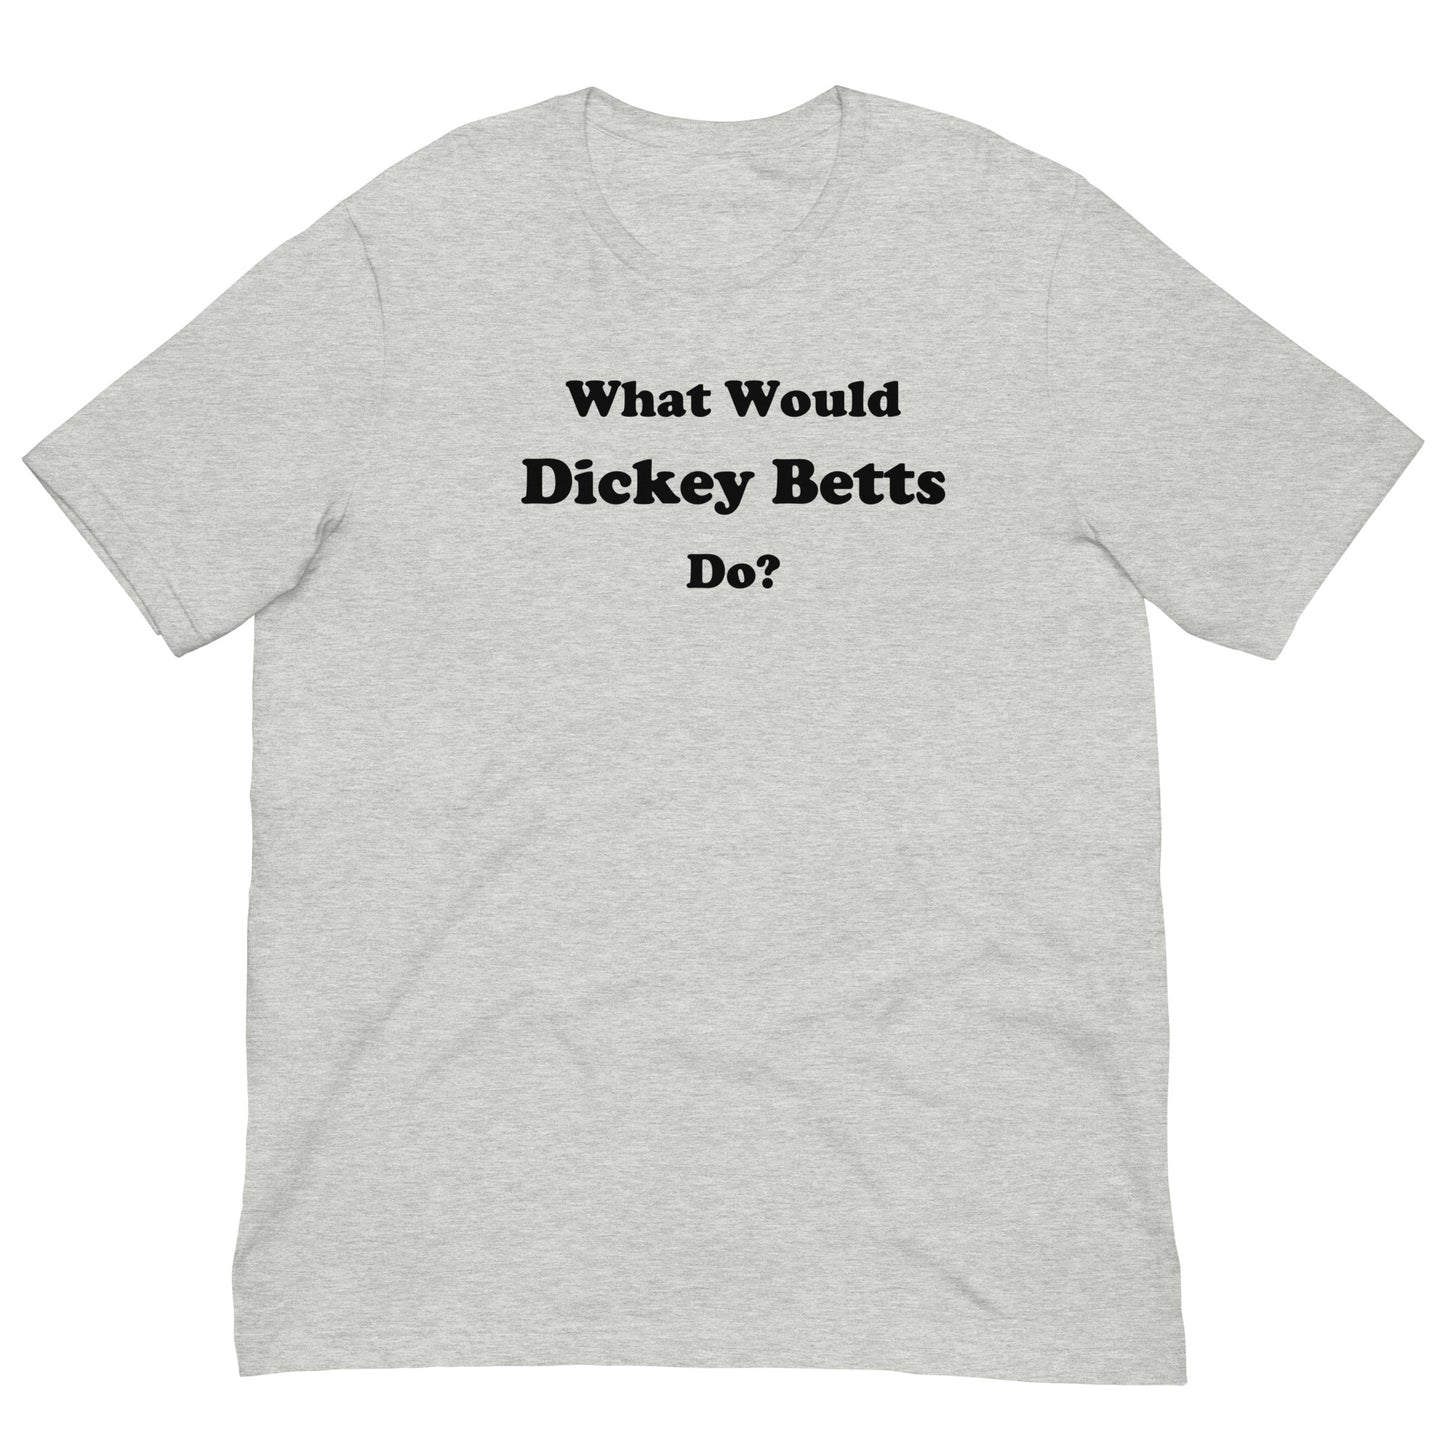 Would Would Dickey Betts Do TShirt (Black Lettering)